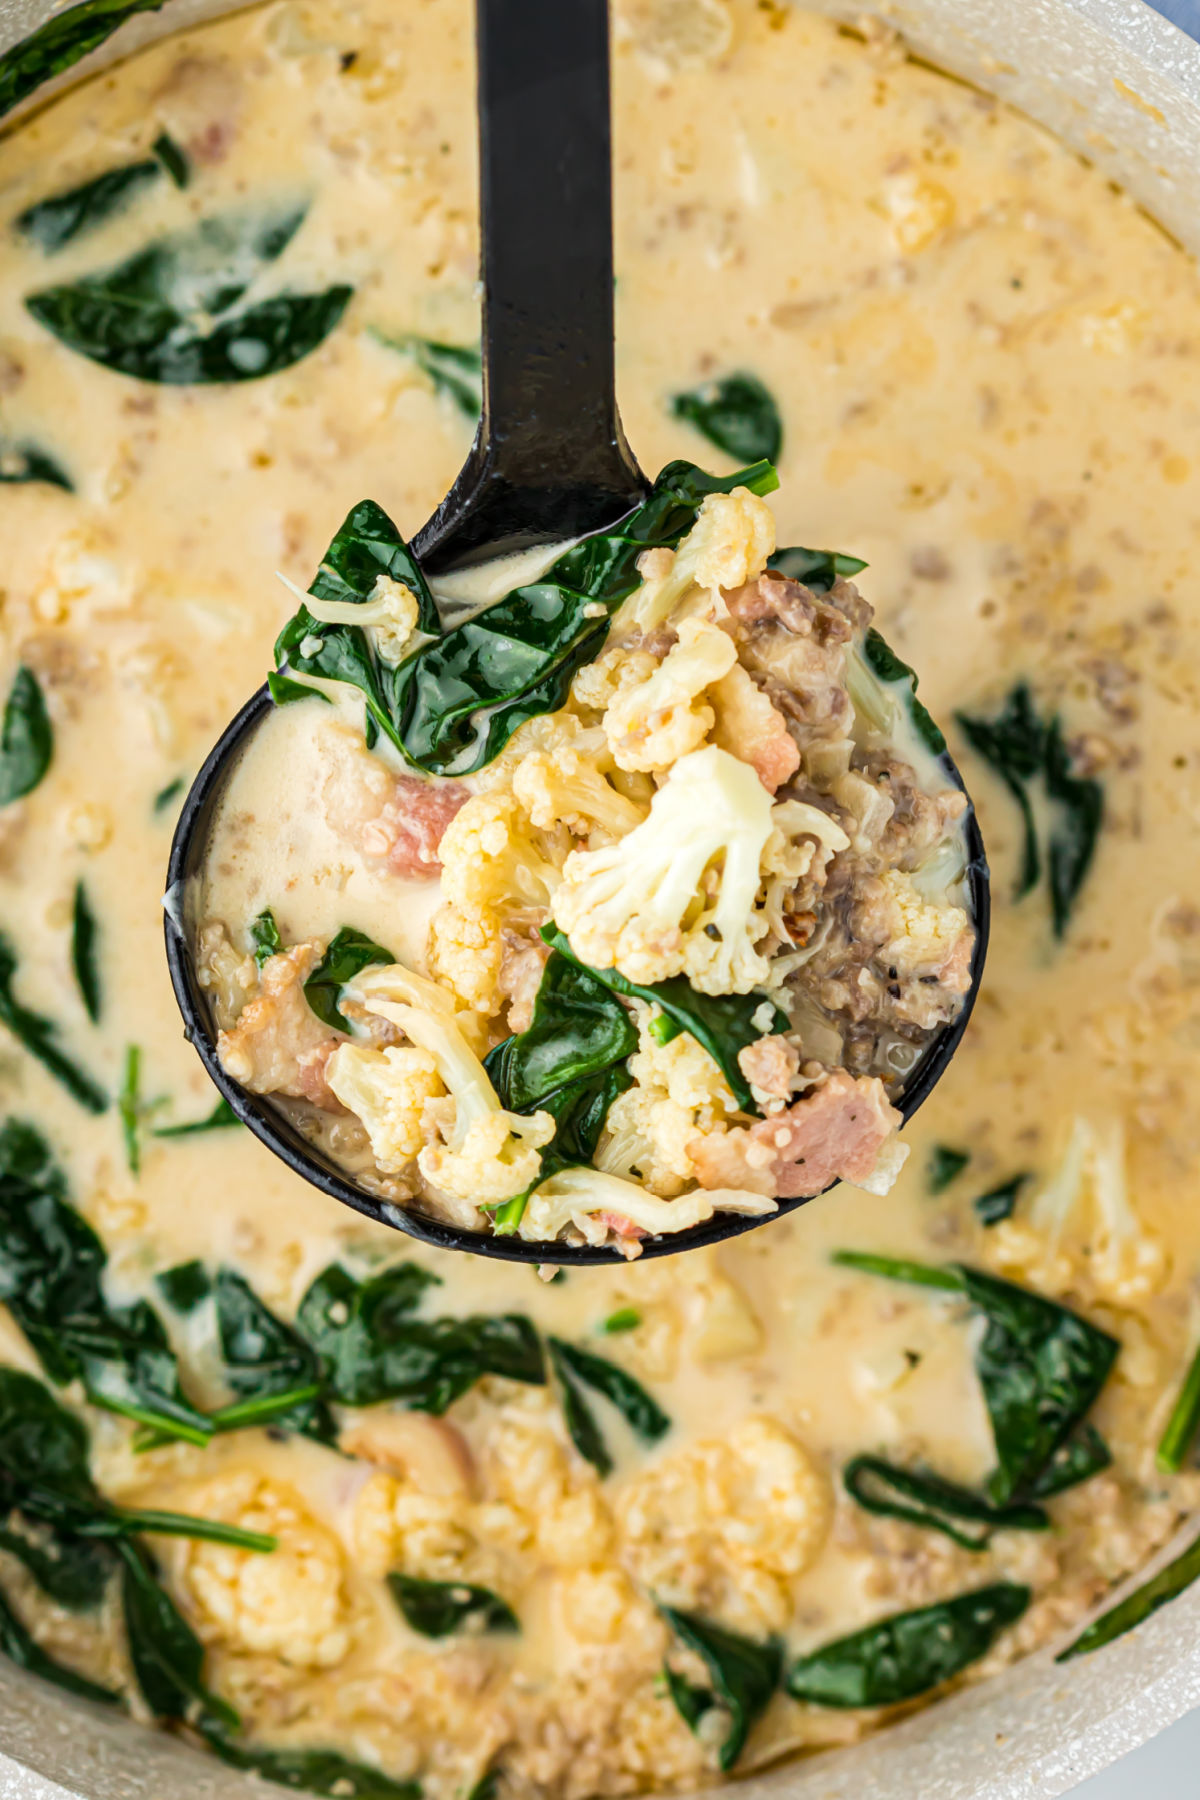 Ladle scooping up zuppa toscana soup.